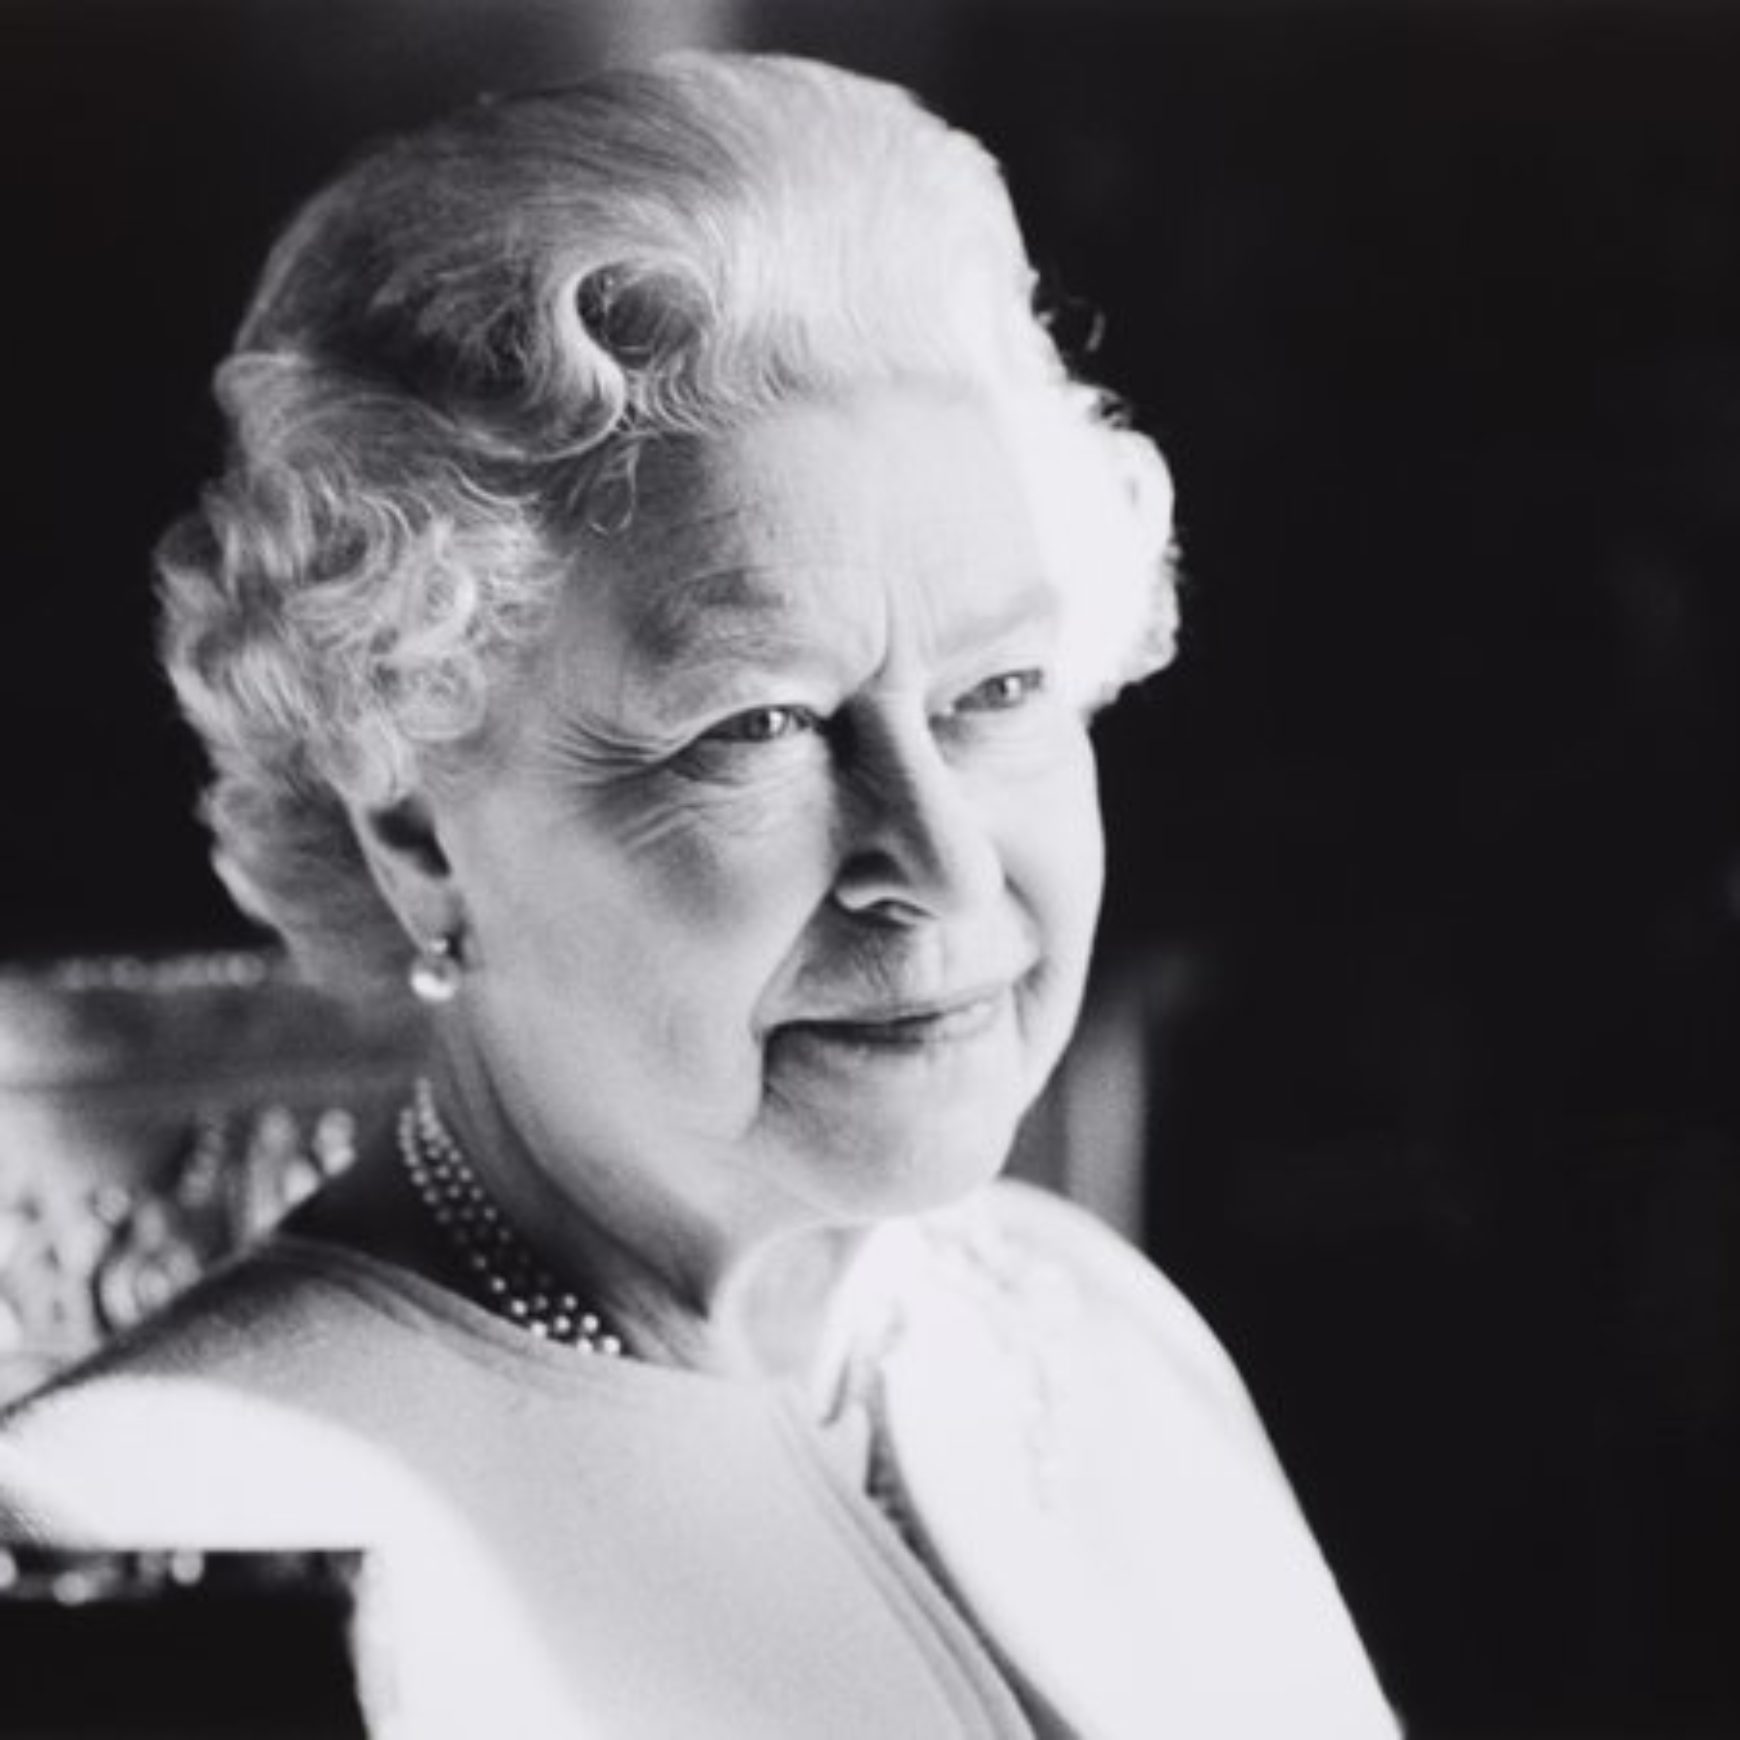 Armitage International offers its deepest condolences to the Royal Family